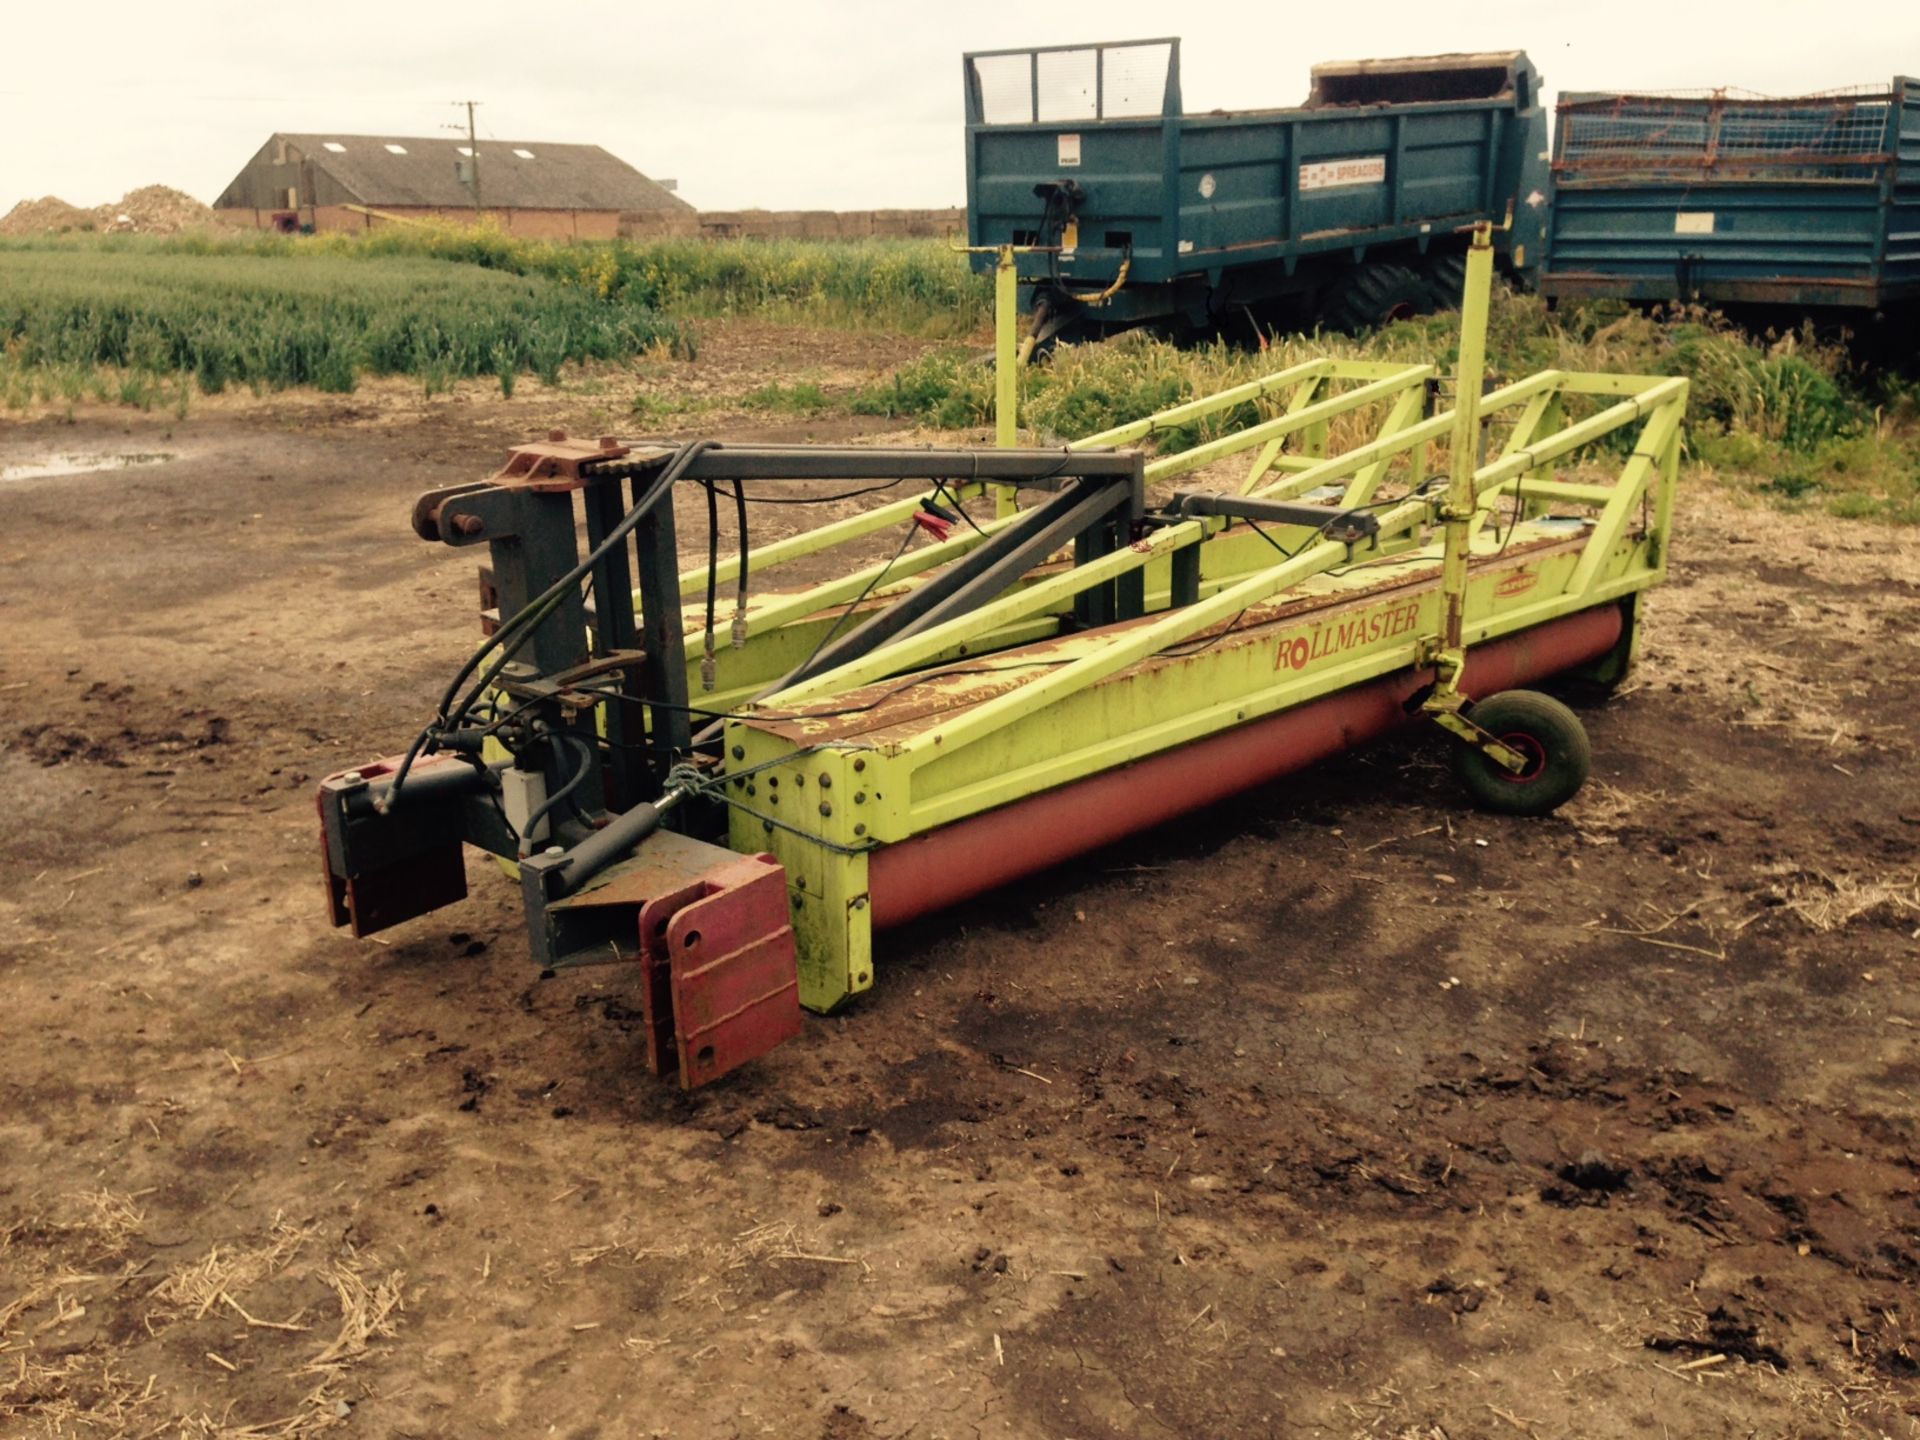 1999 Roll Master 6m Weed Wiper RL000200R/Master. Location Bourne, Lincolnshire